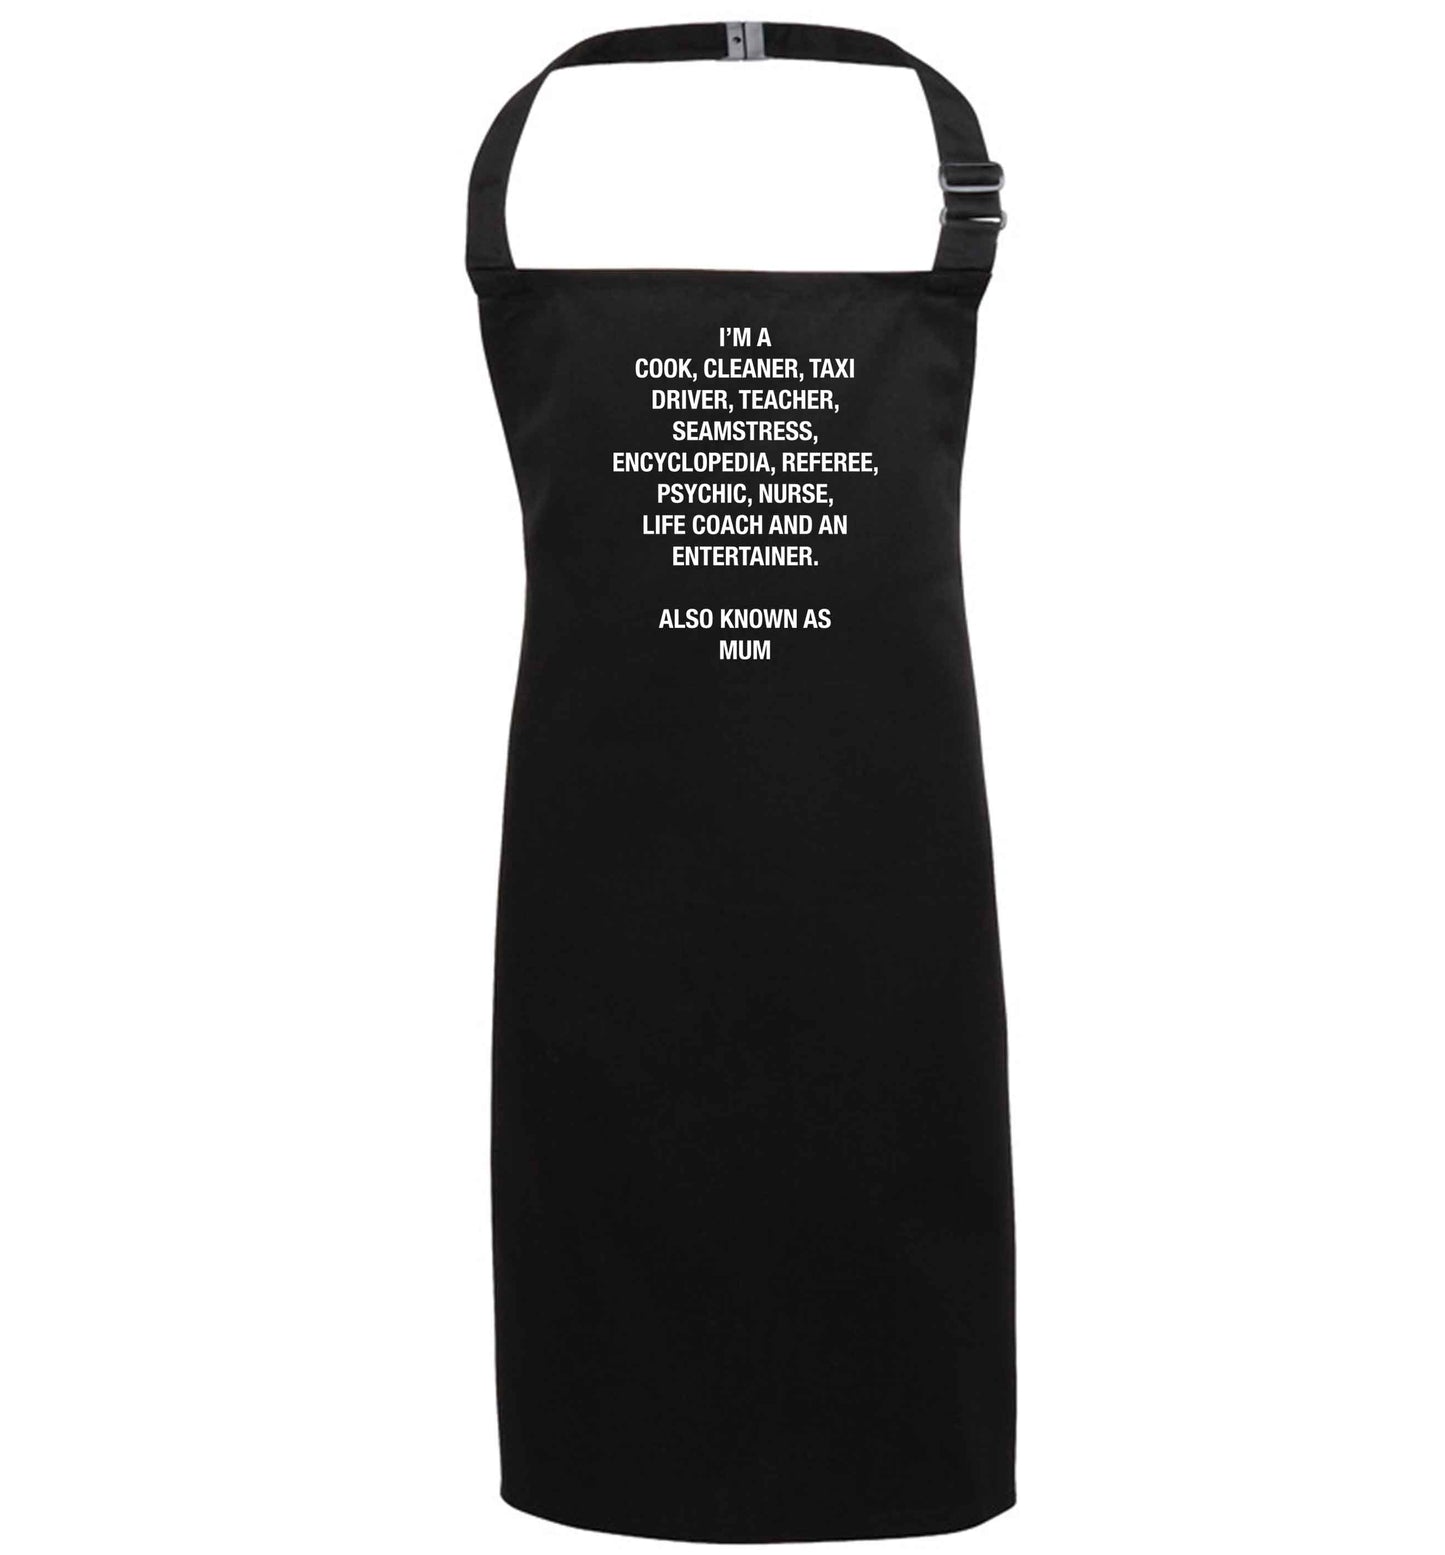 Funny gifts for your mum on mother's dayor her birthday! Mum, cook, cleaner, taxi driver, teacher, seamstress, encyclopedia, referee, psychic, nurse, life coach and entertainer black apron 7-10 years